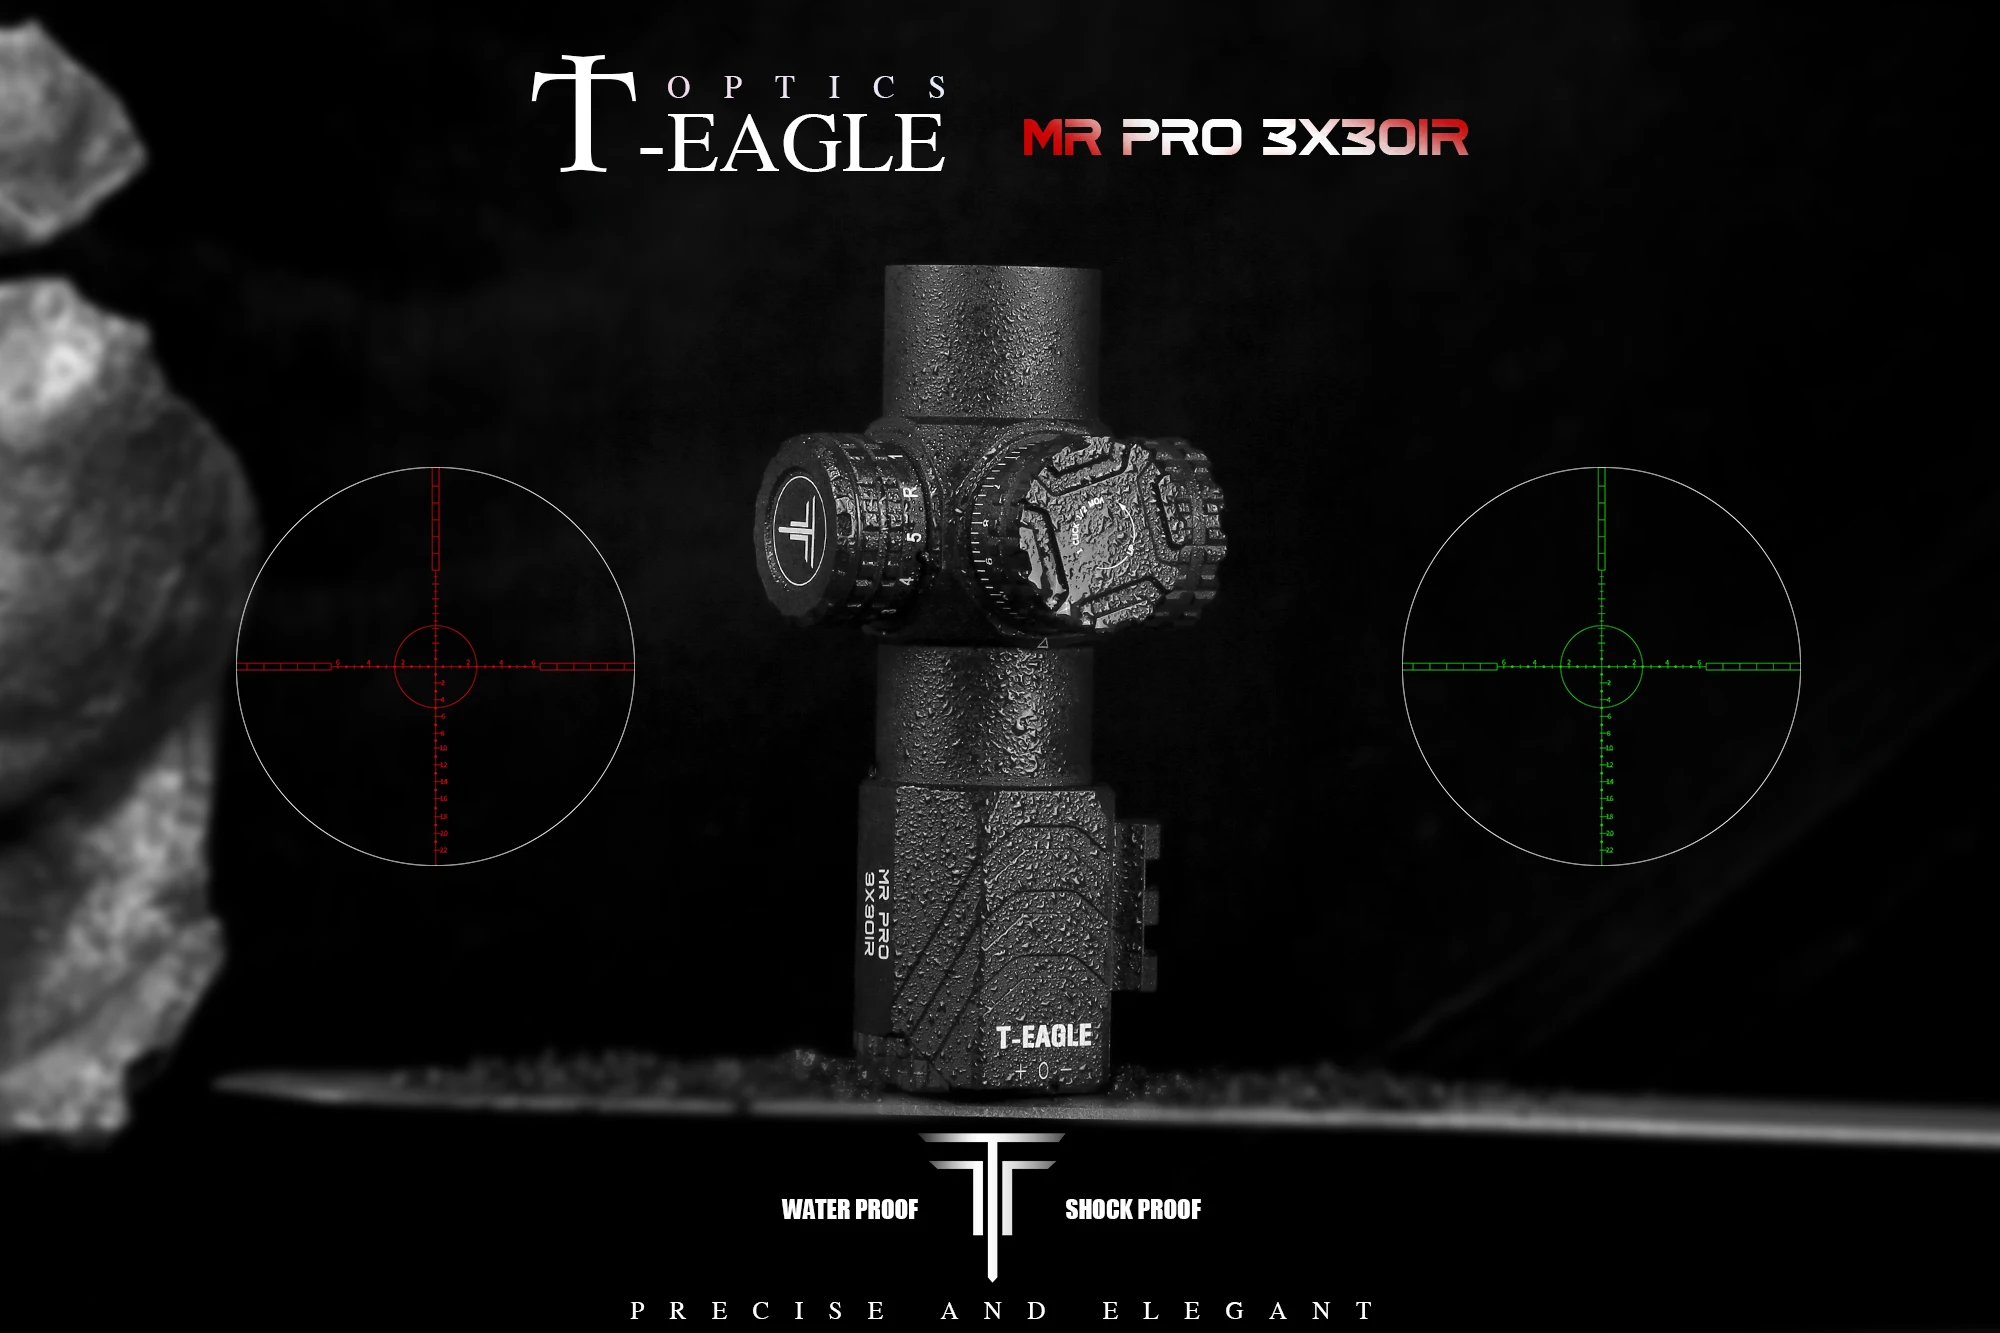 

T-Eagle MR Pro 3x30IR Optical Airsoft Gun Weapons Lunettes 34mm Tube Rifle Scope For Hunting Pistol Sight Airgun Riflescope